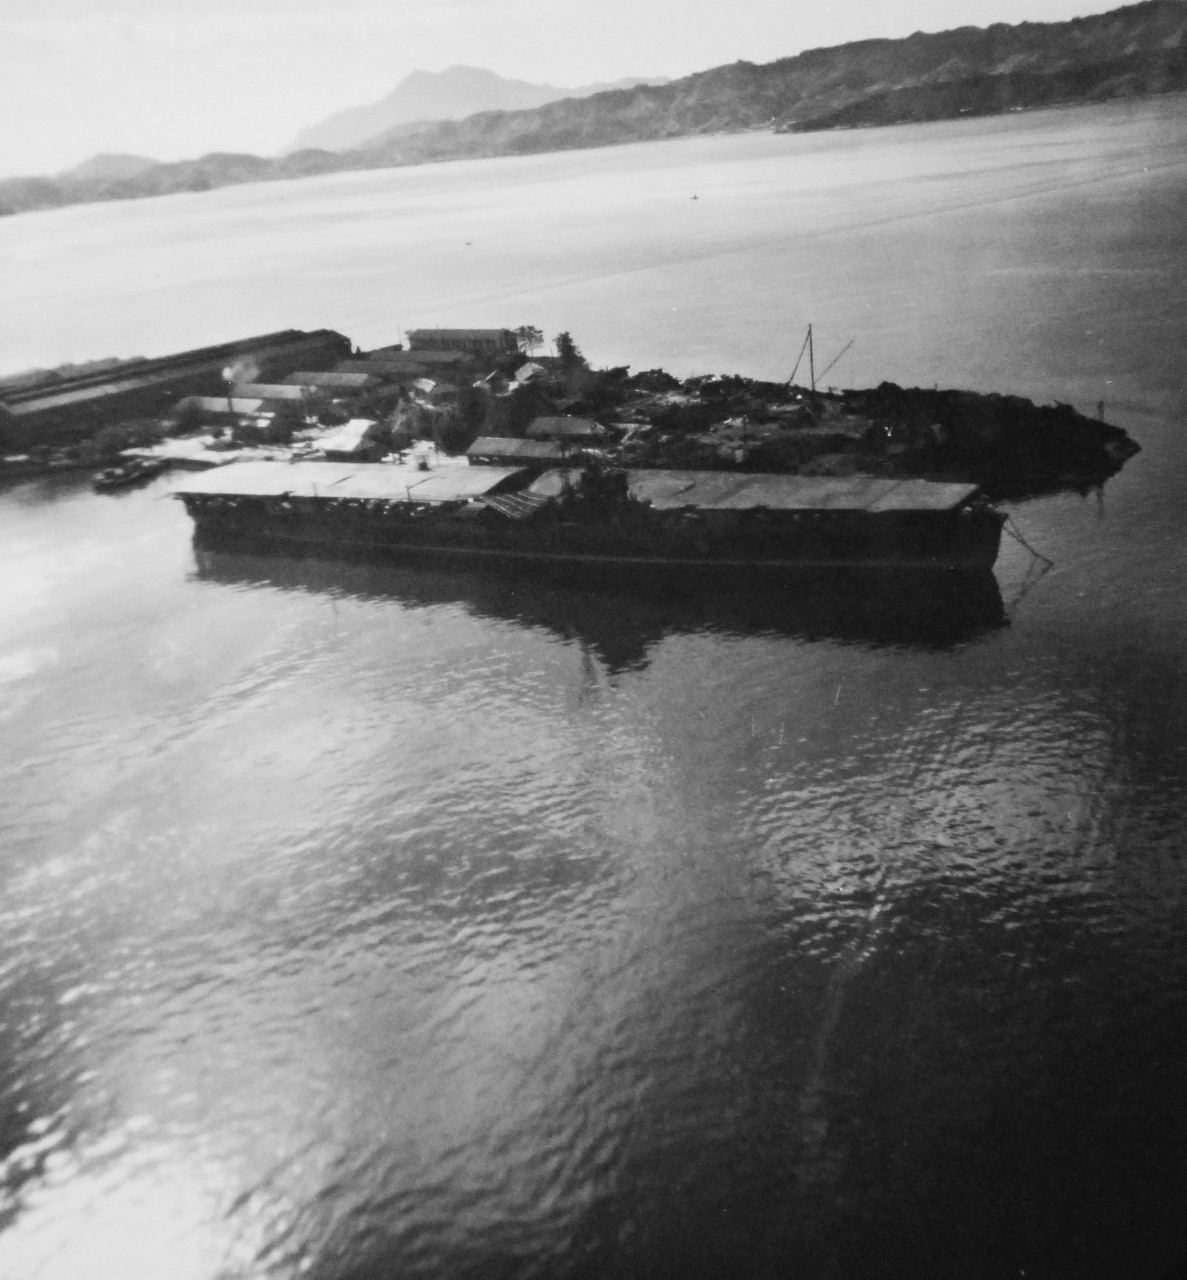 80-G-349908:   Damaged Japanese ships in Kure Harbor, Japan.  Shown is Japanese aircraft carrier Katsuragi.   Photographed by aircraft from USS St. George (AV 16), 14 October 1945.  (6/19/2014). 